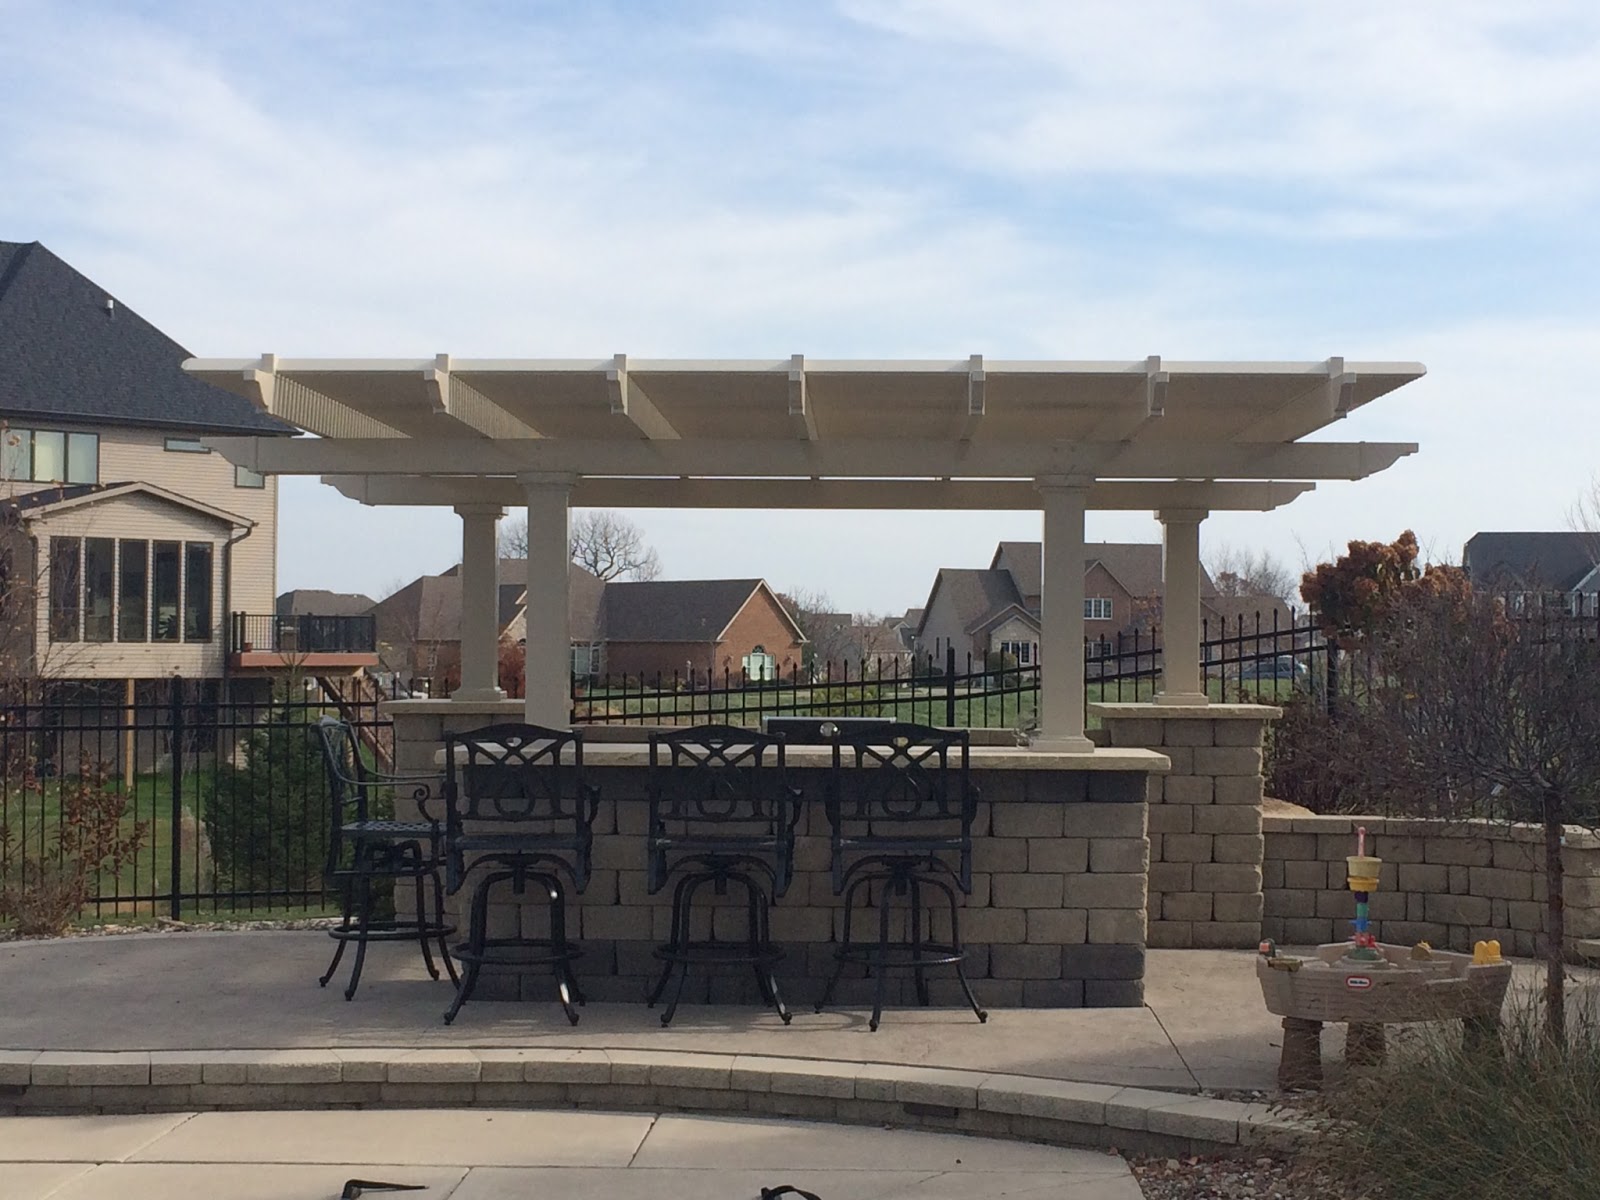 This outdoor bar has a tan pergola covering the eating area. There are black chairs pulled up to the bar. The space overlooks the rest of the neighborhood.